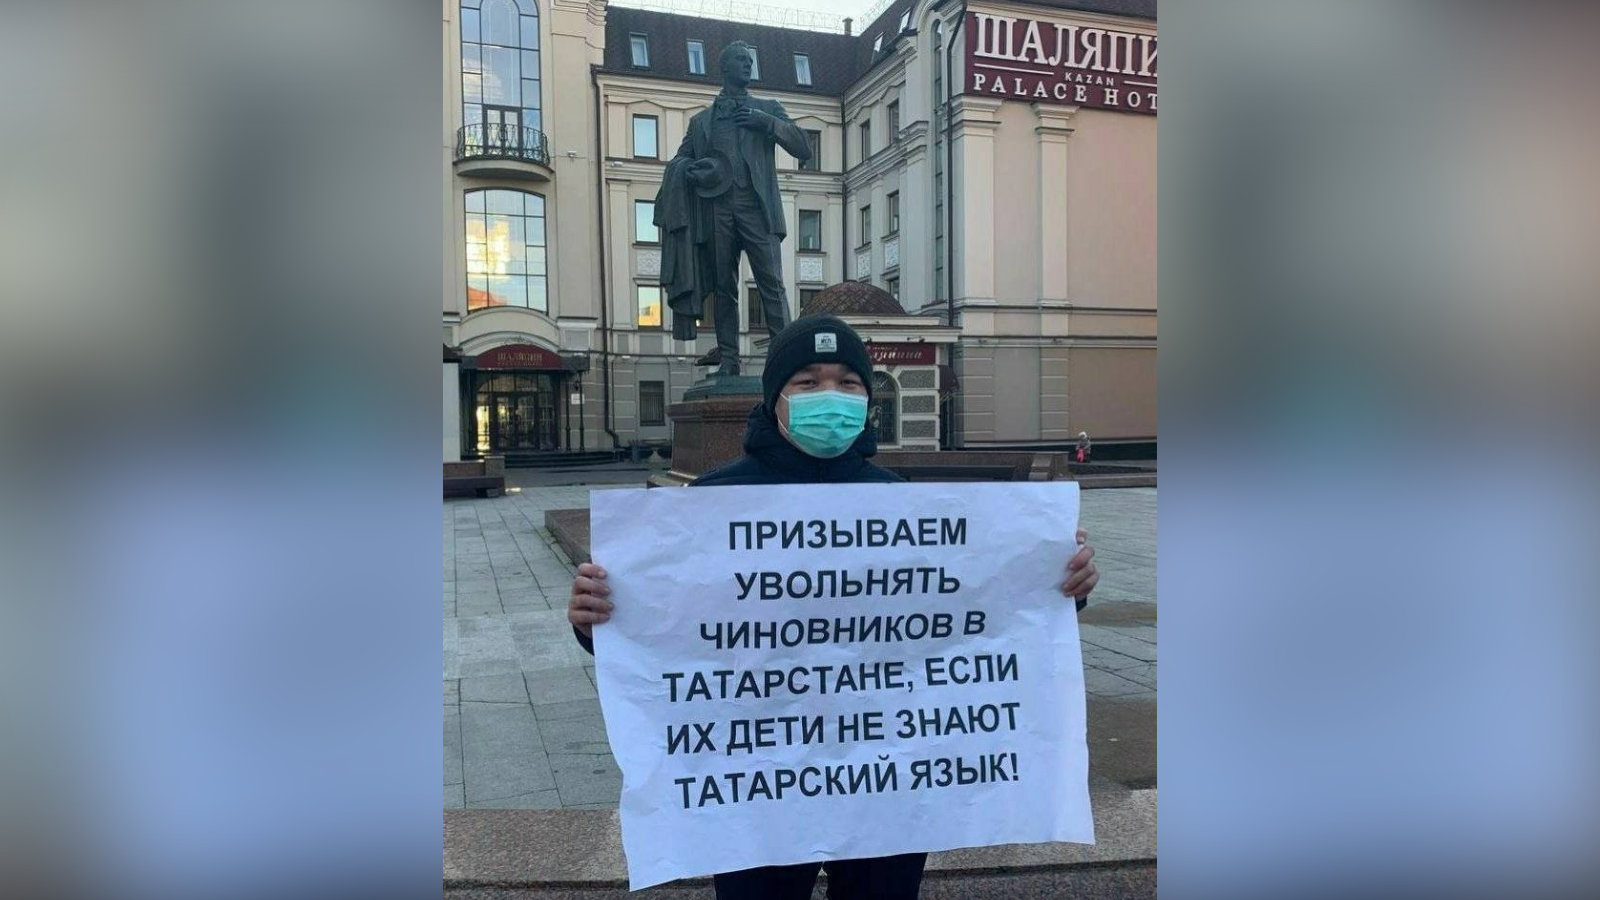 A picket was held in Kazan demanding the dismissal of officials whose children do not know the Tatar language